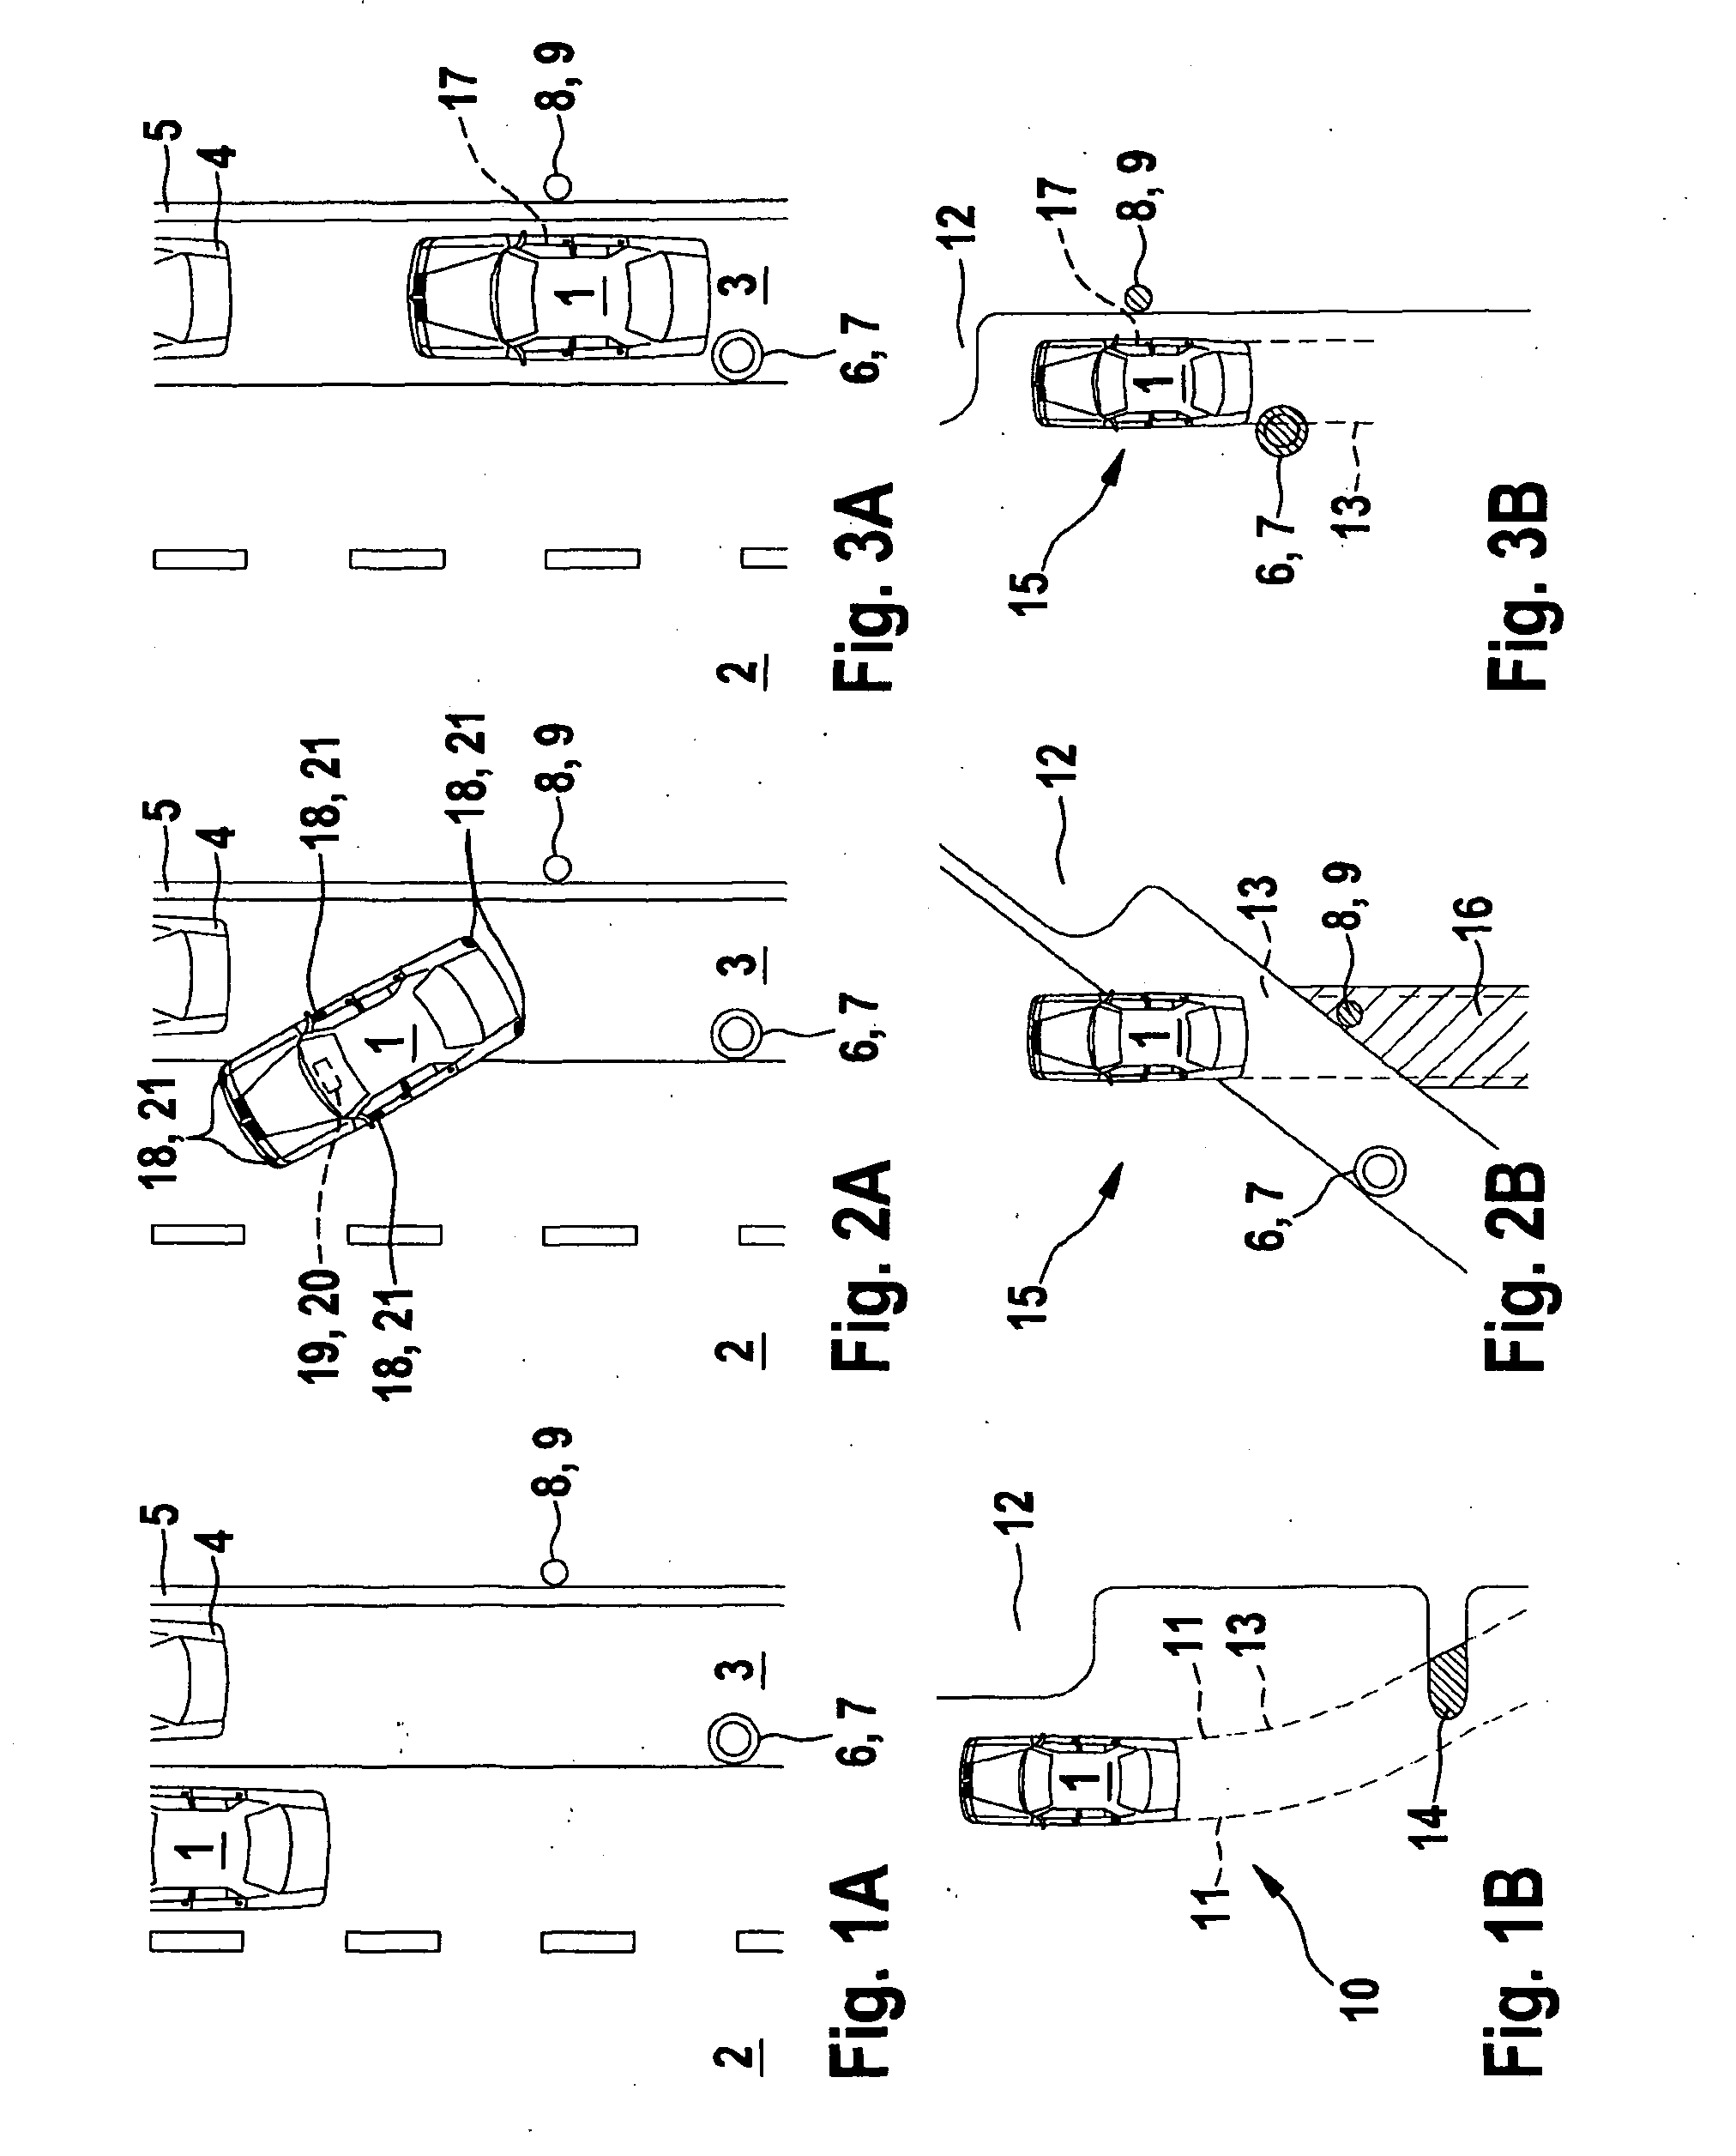 Method and device for displaying the surroundings of a vehicle